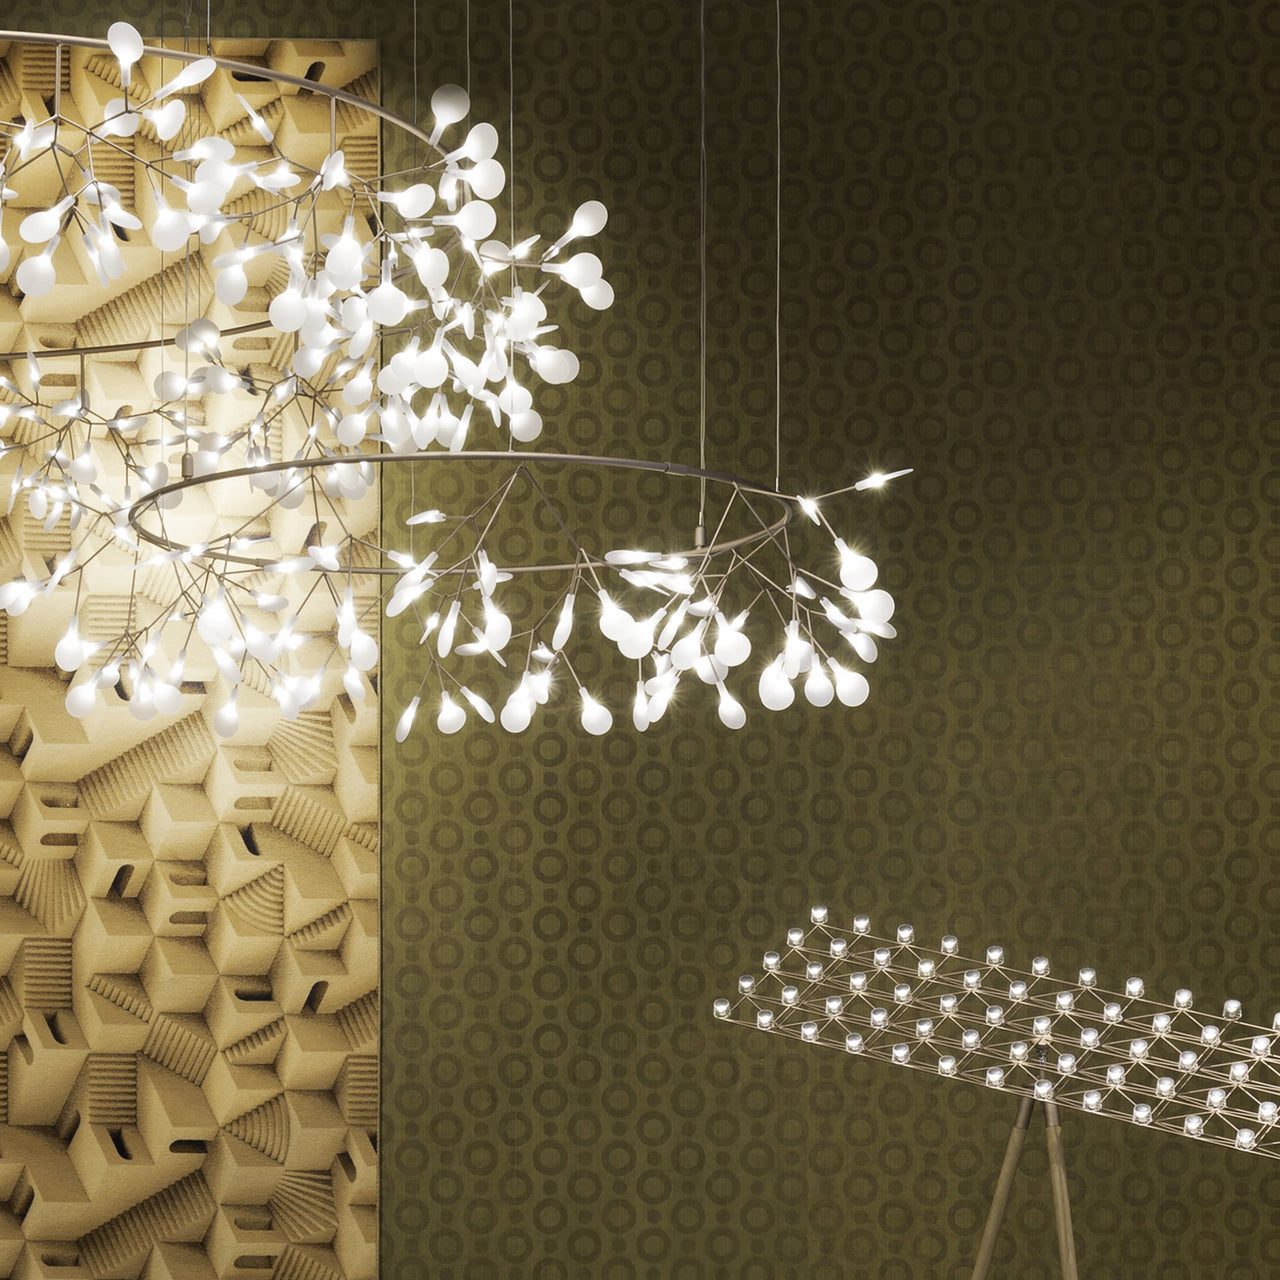 Heracleum III The Small Big O Suspension Lamp